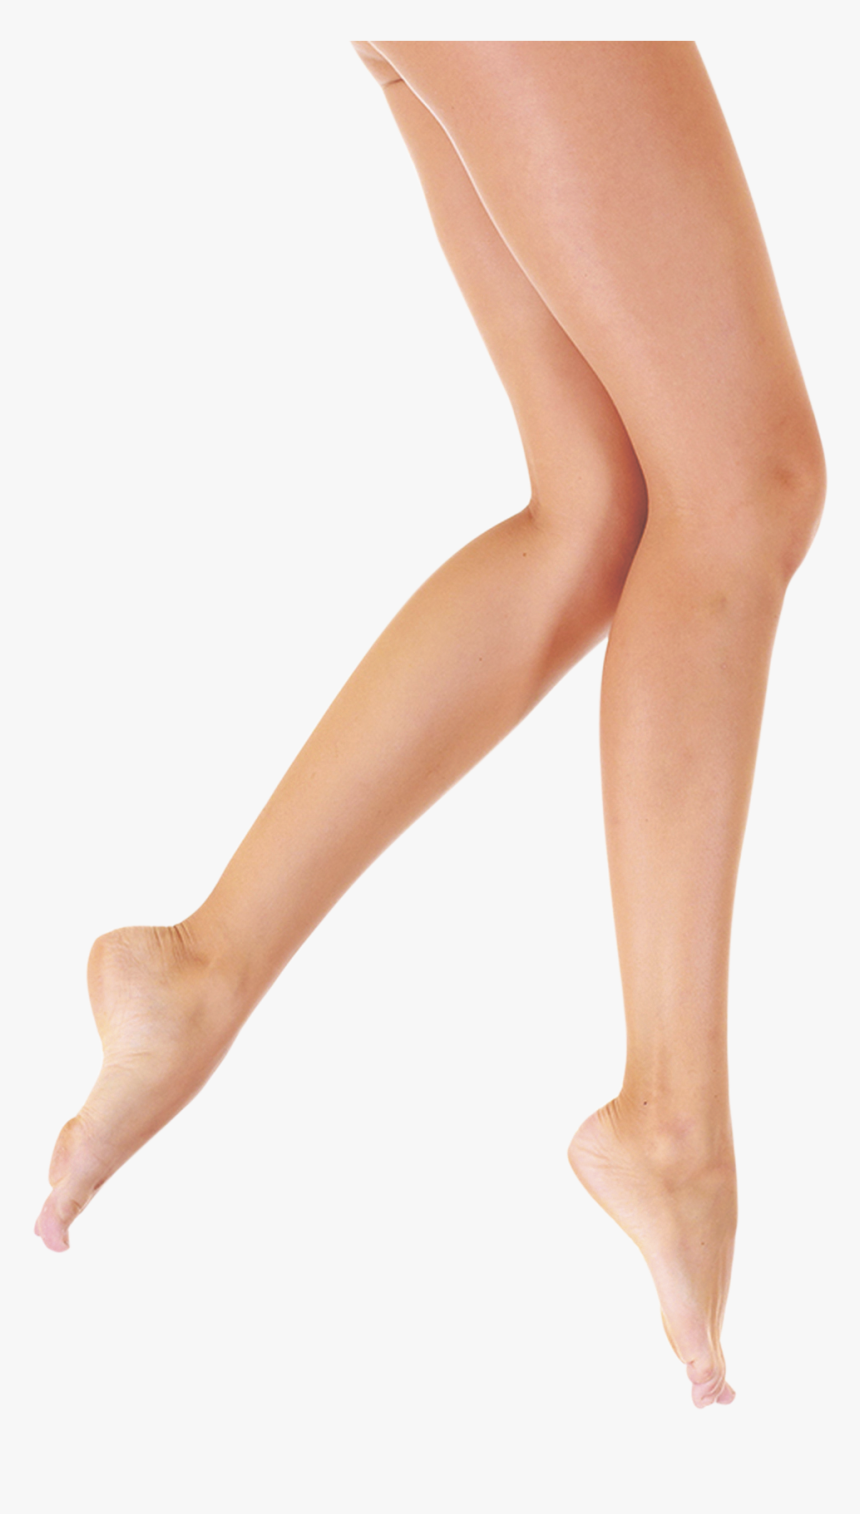 Now You Can Download Legs Transparent Png Image - Legs Png, Png Download, Free Download